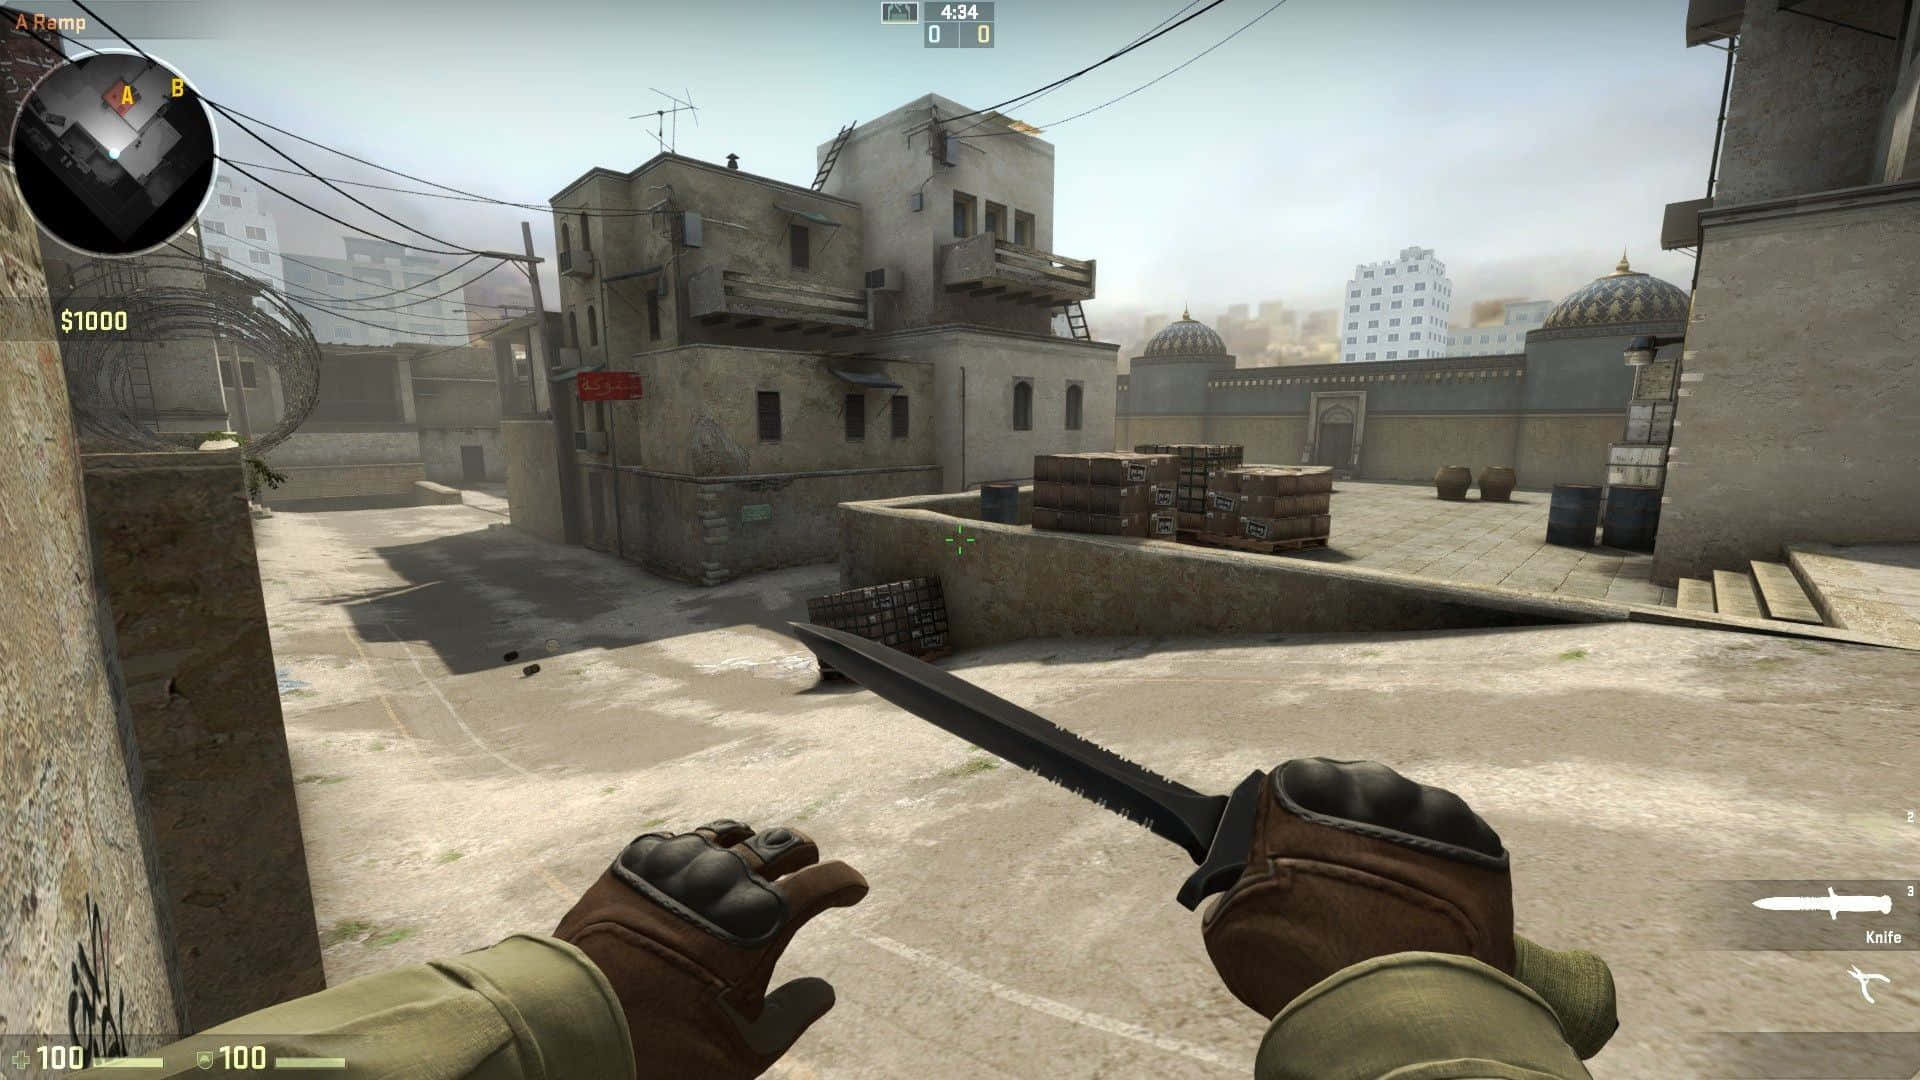 “Immerse yourself in the world of Counter-Strike: Global Offensive”